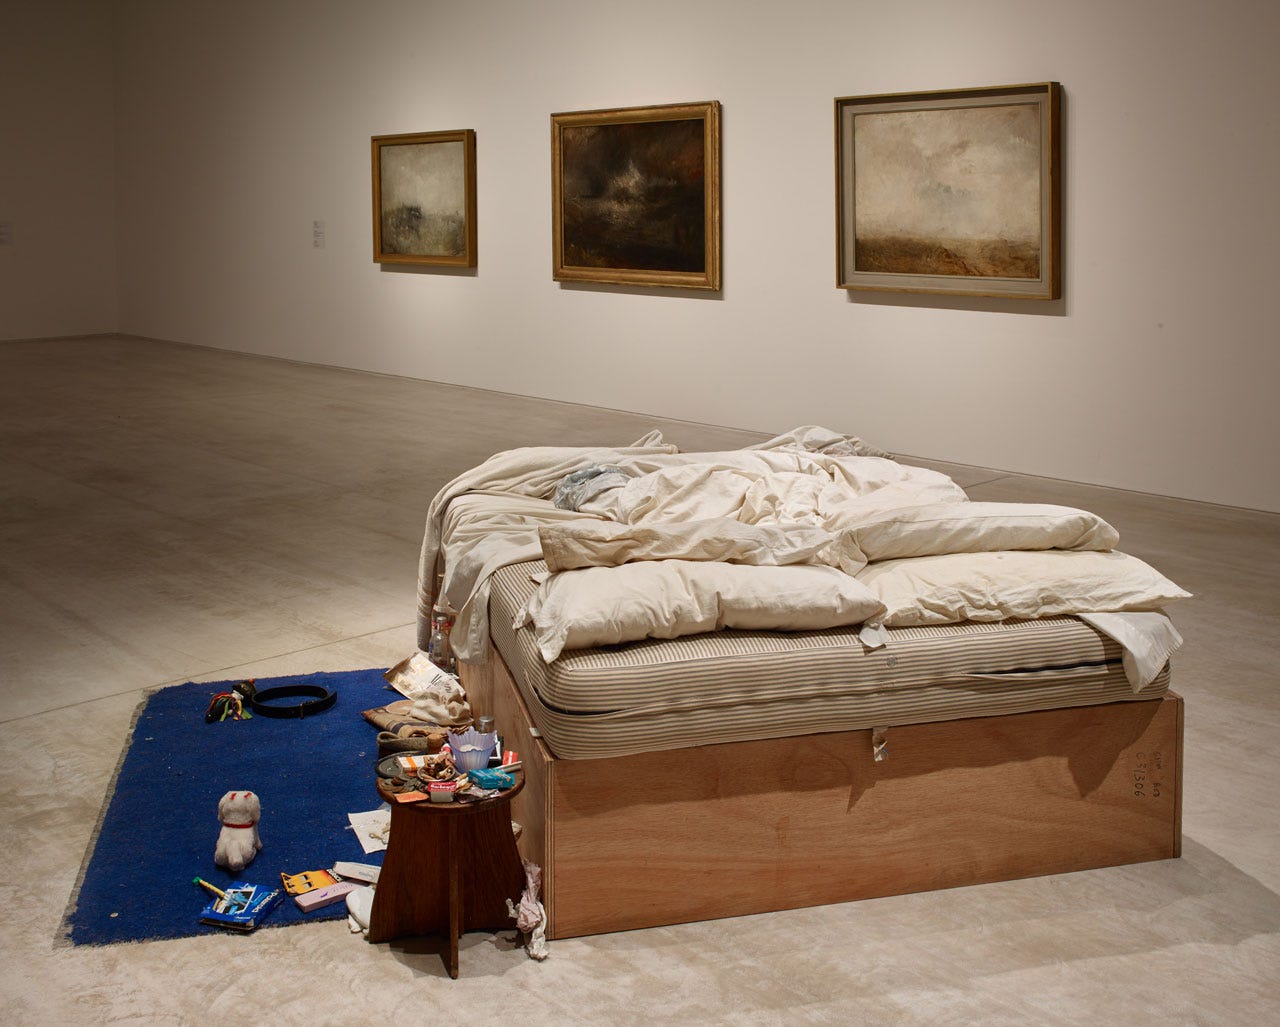 Tracey Emin's My Bed. Revisiting a work I disliked | by jessica | Medium